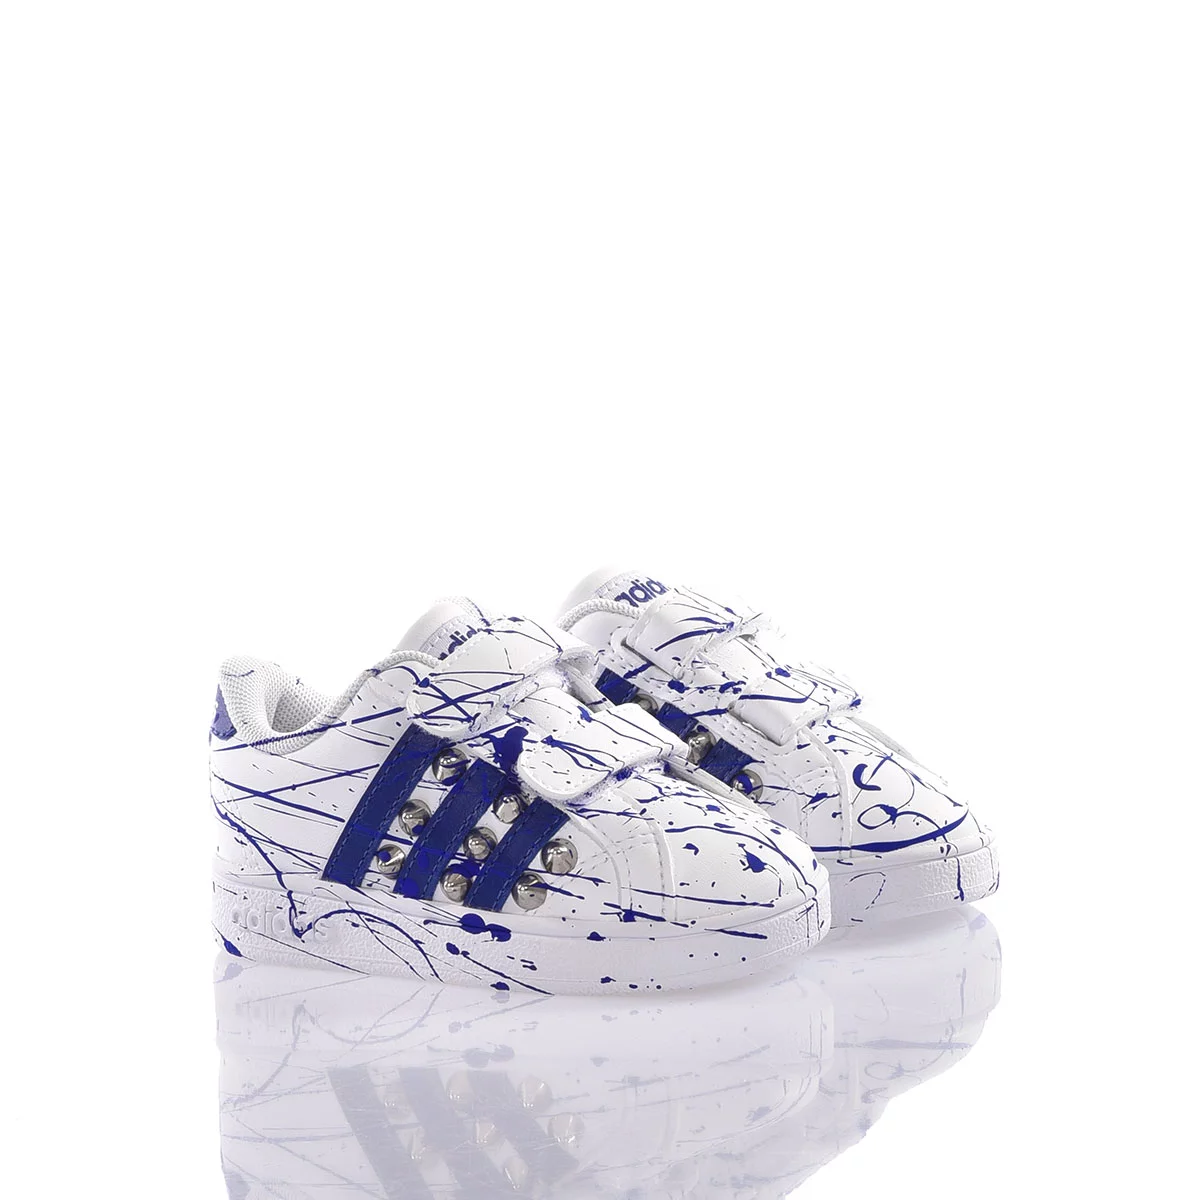 Adidas Baby Royal Paint  Borchie, Special